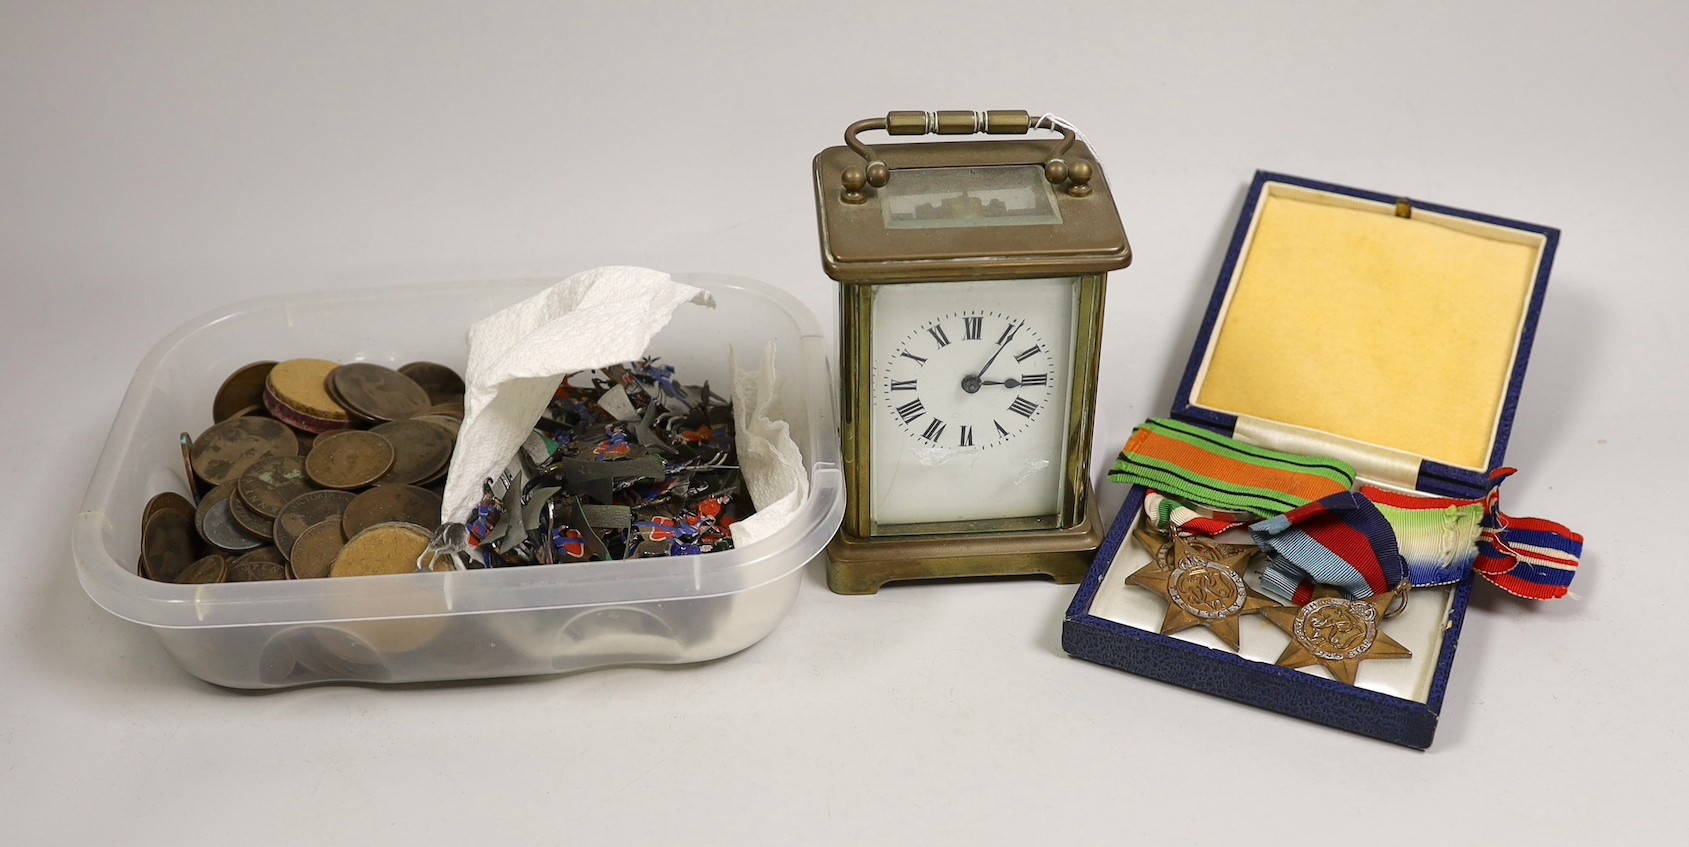 Medals, toy soldiers, medals, coinage and carriage clock